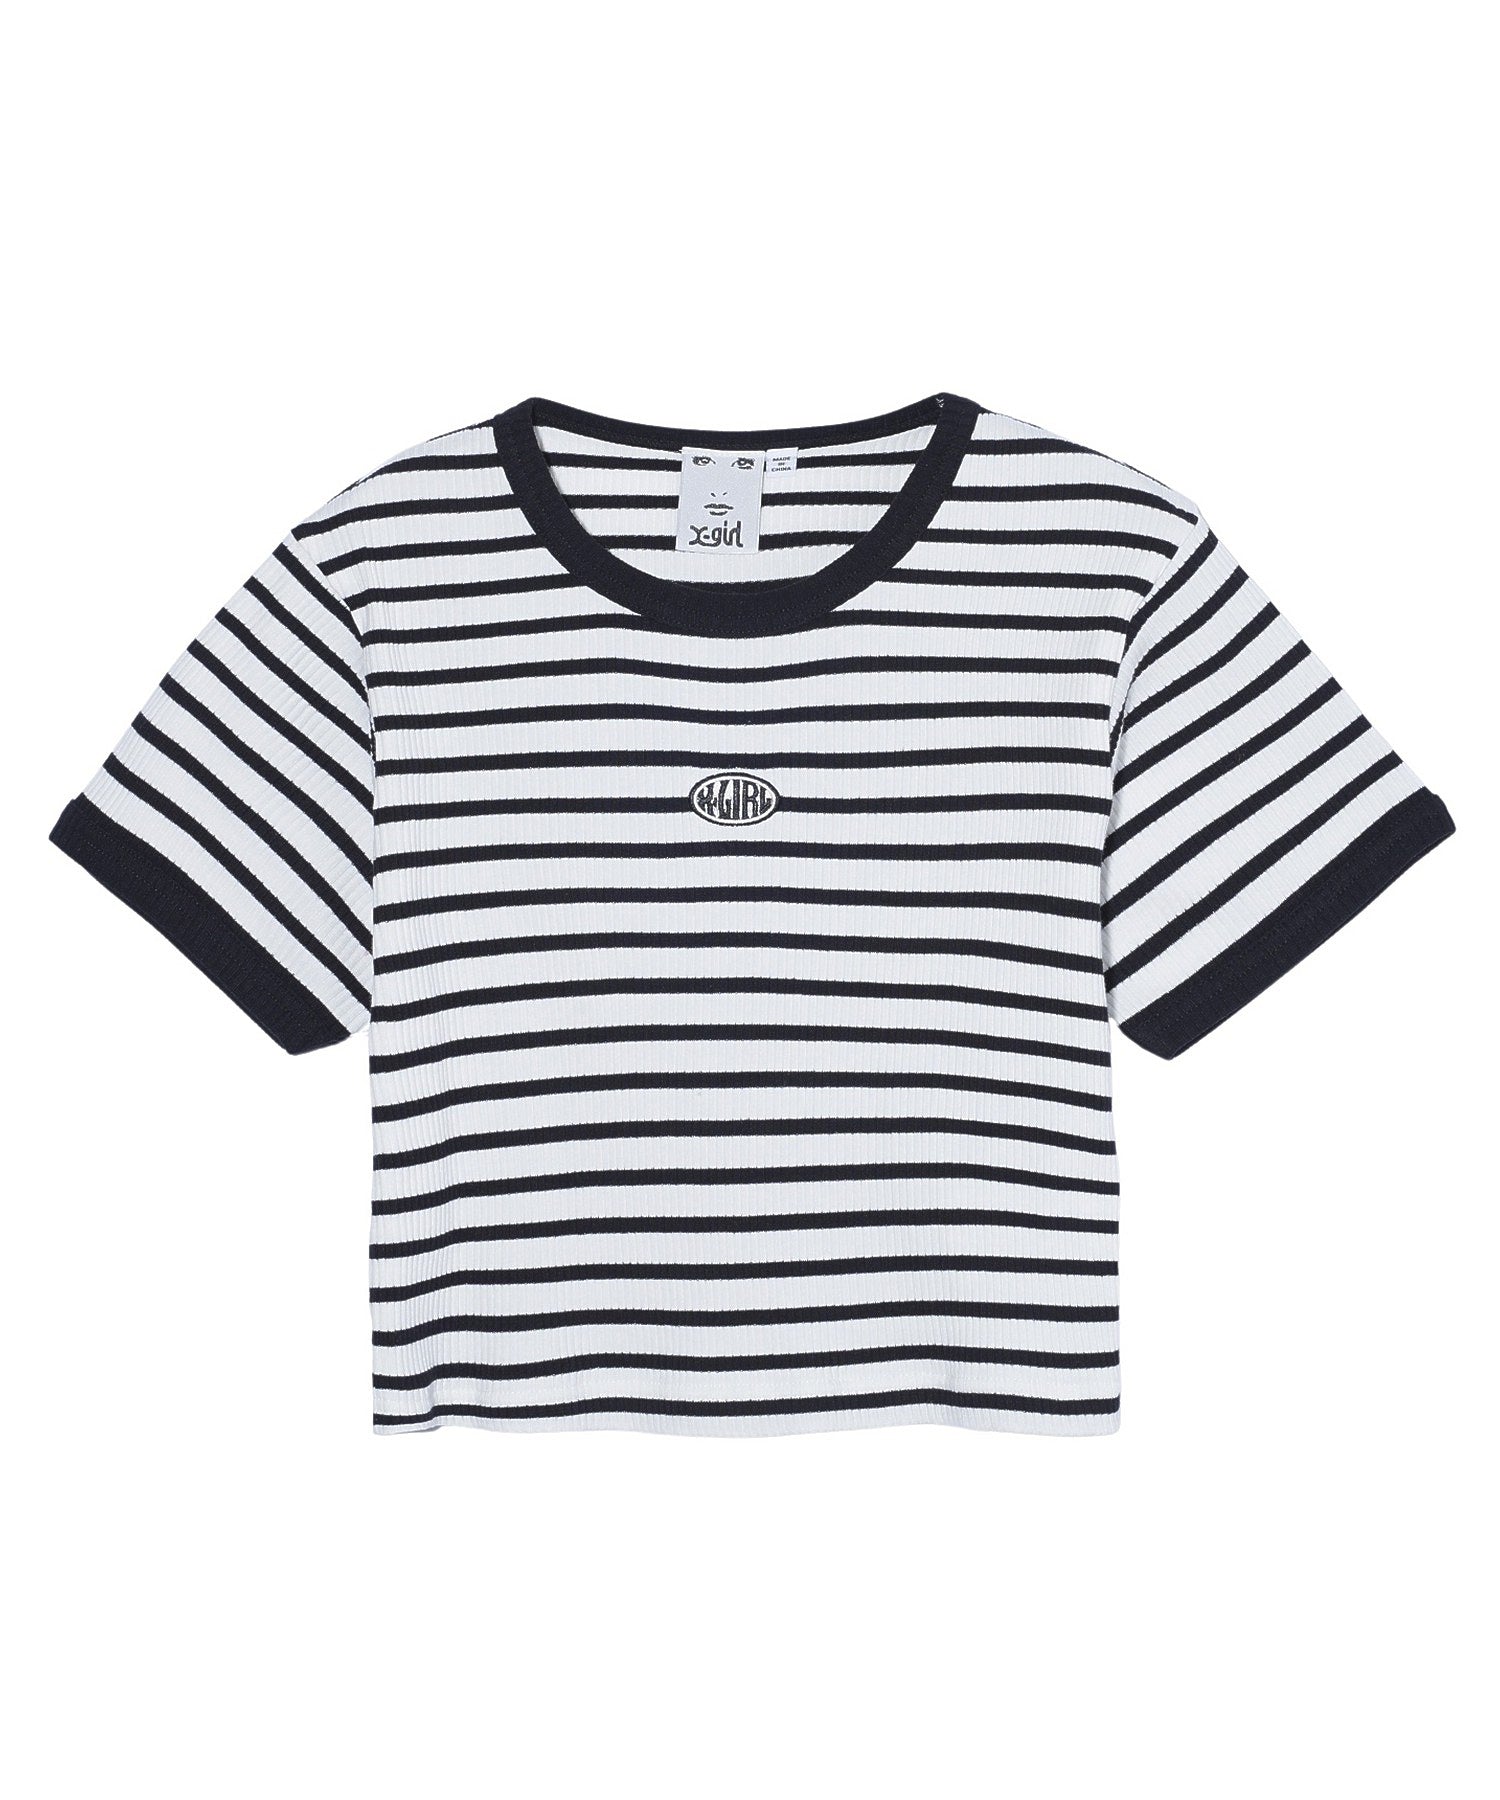 OVAL LOGO S/S TOP